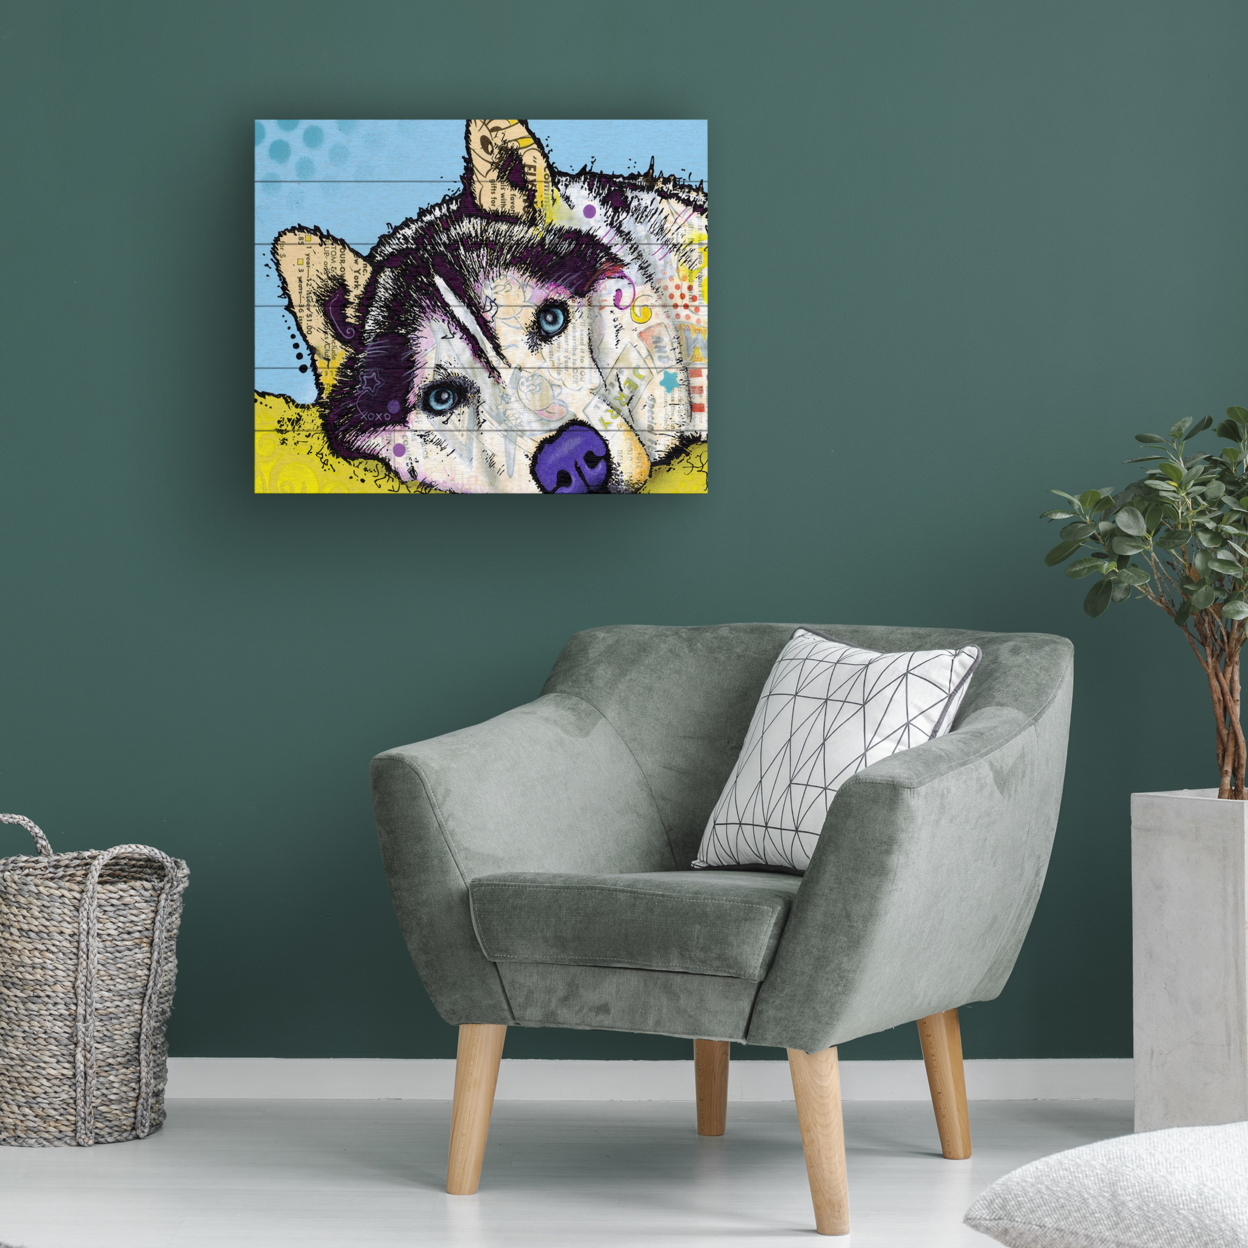 Wooden Slat Art 18 X 22 Inches Titled Siberian Husky II Ready To Hang Home Decor Picture